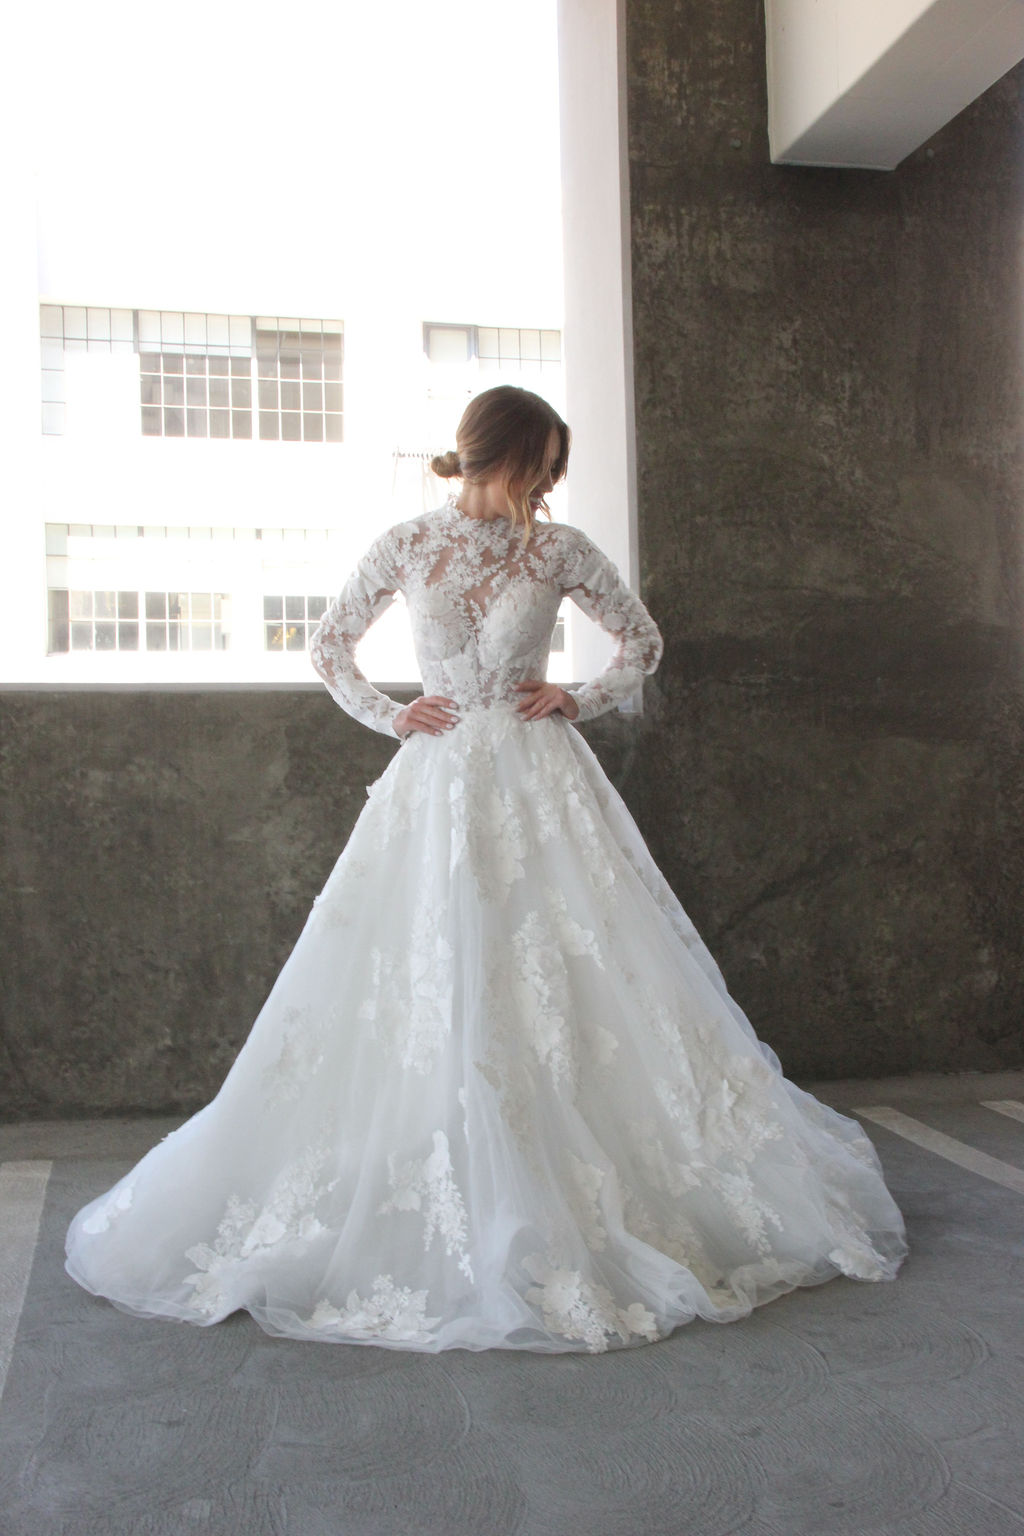 Floral Lace Wedding Dress With High Neck and Long Sleeve